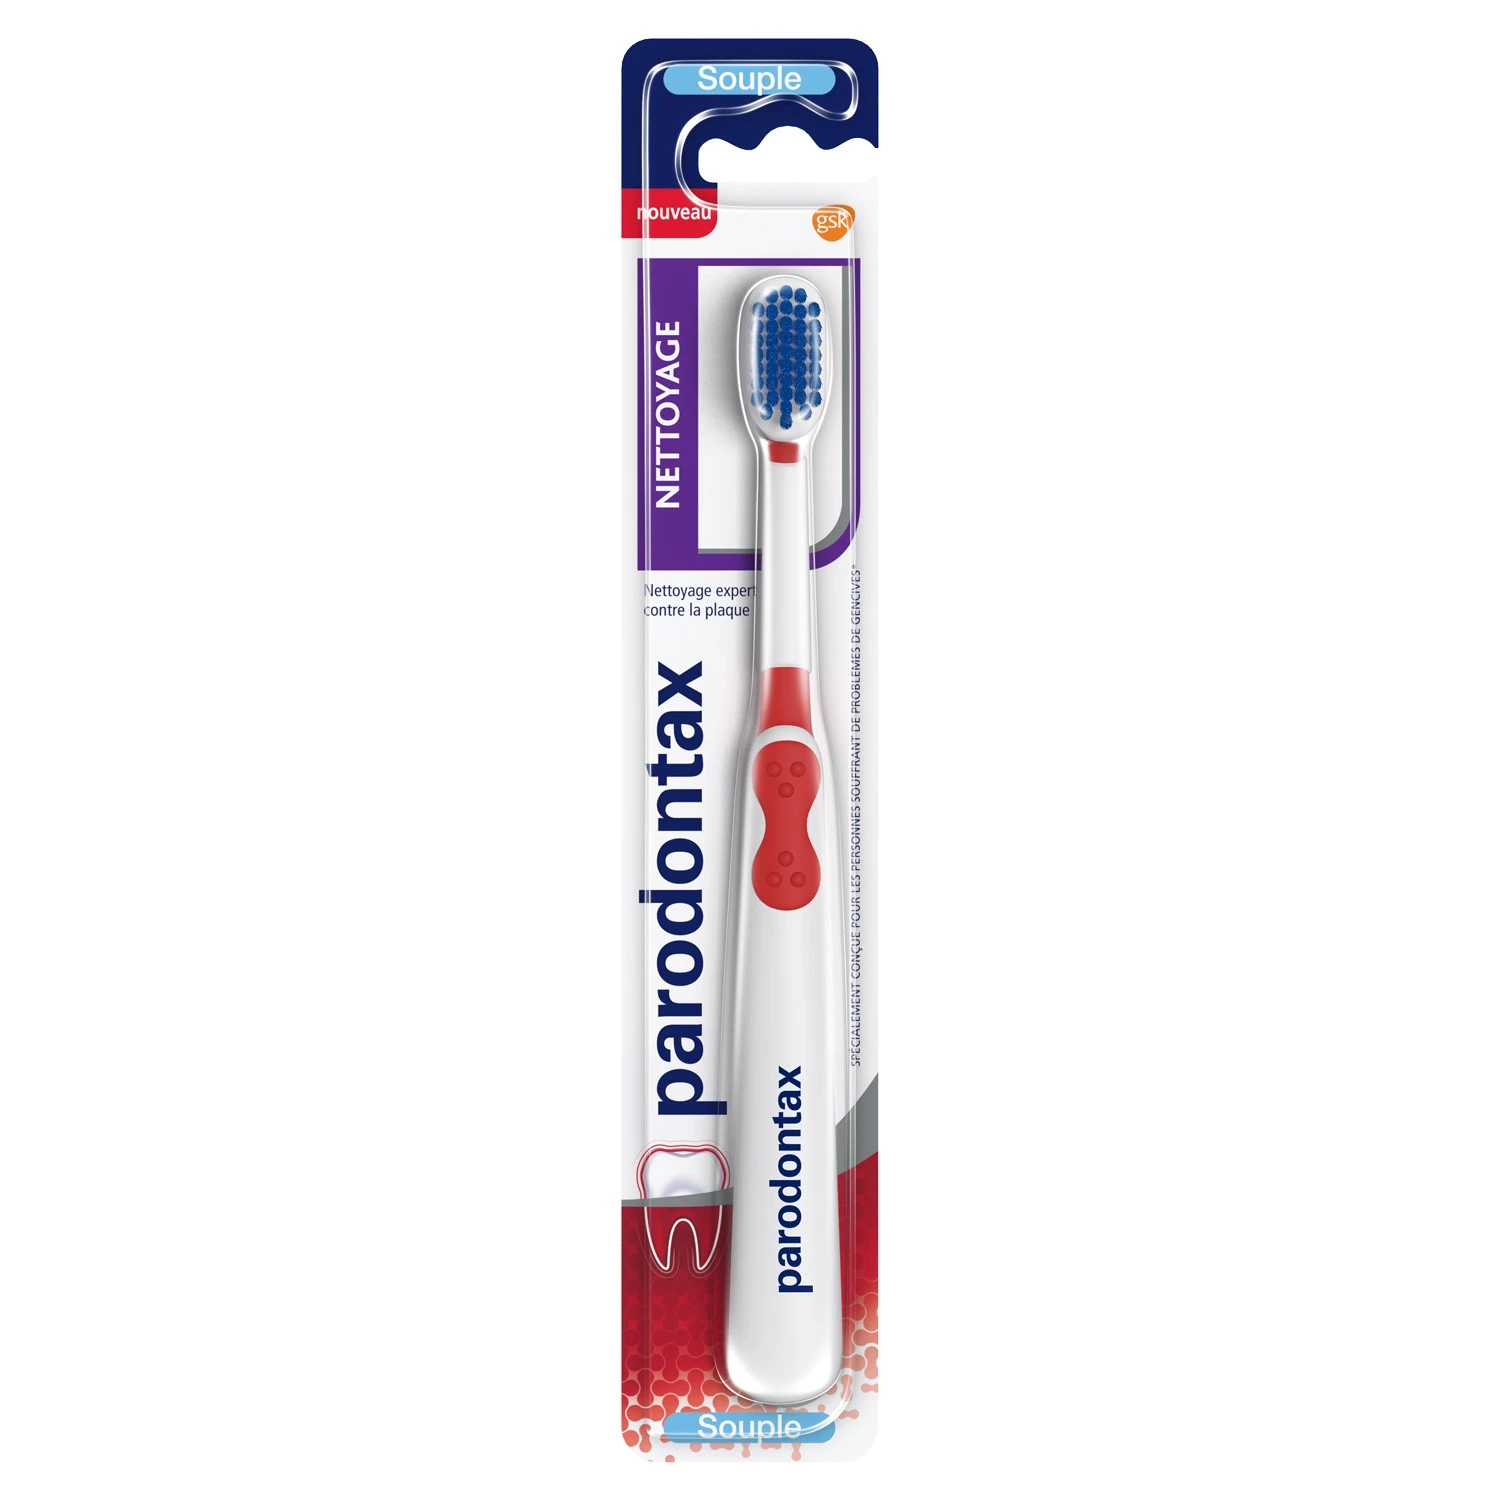 Soft cleaning toothbrush - PARONDONTAX